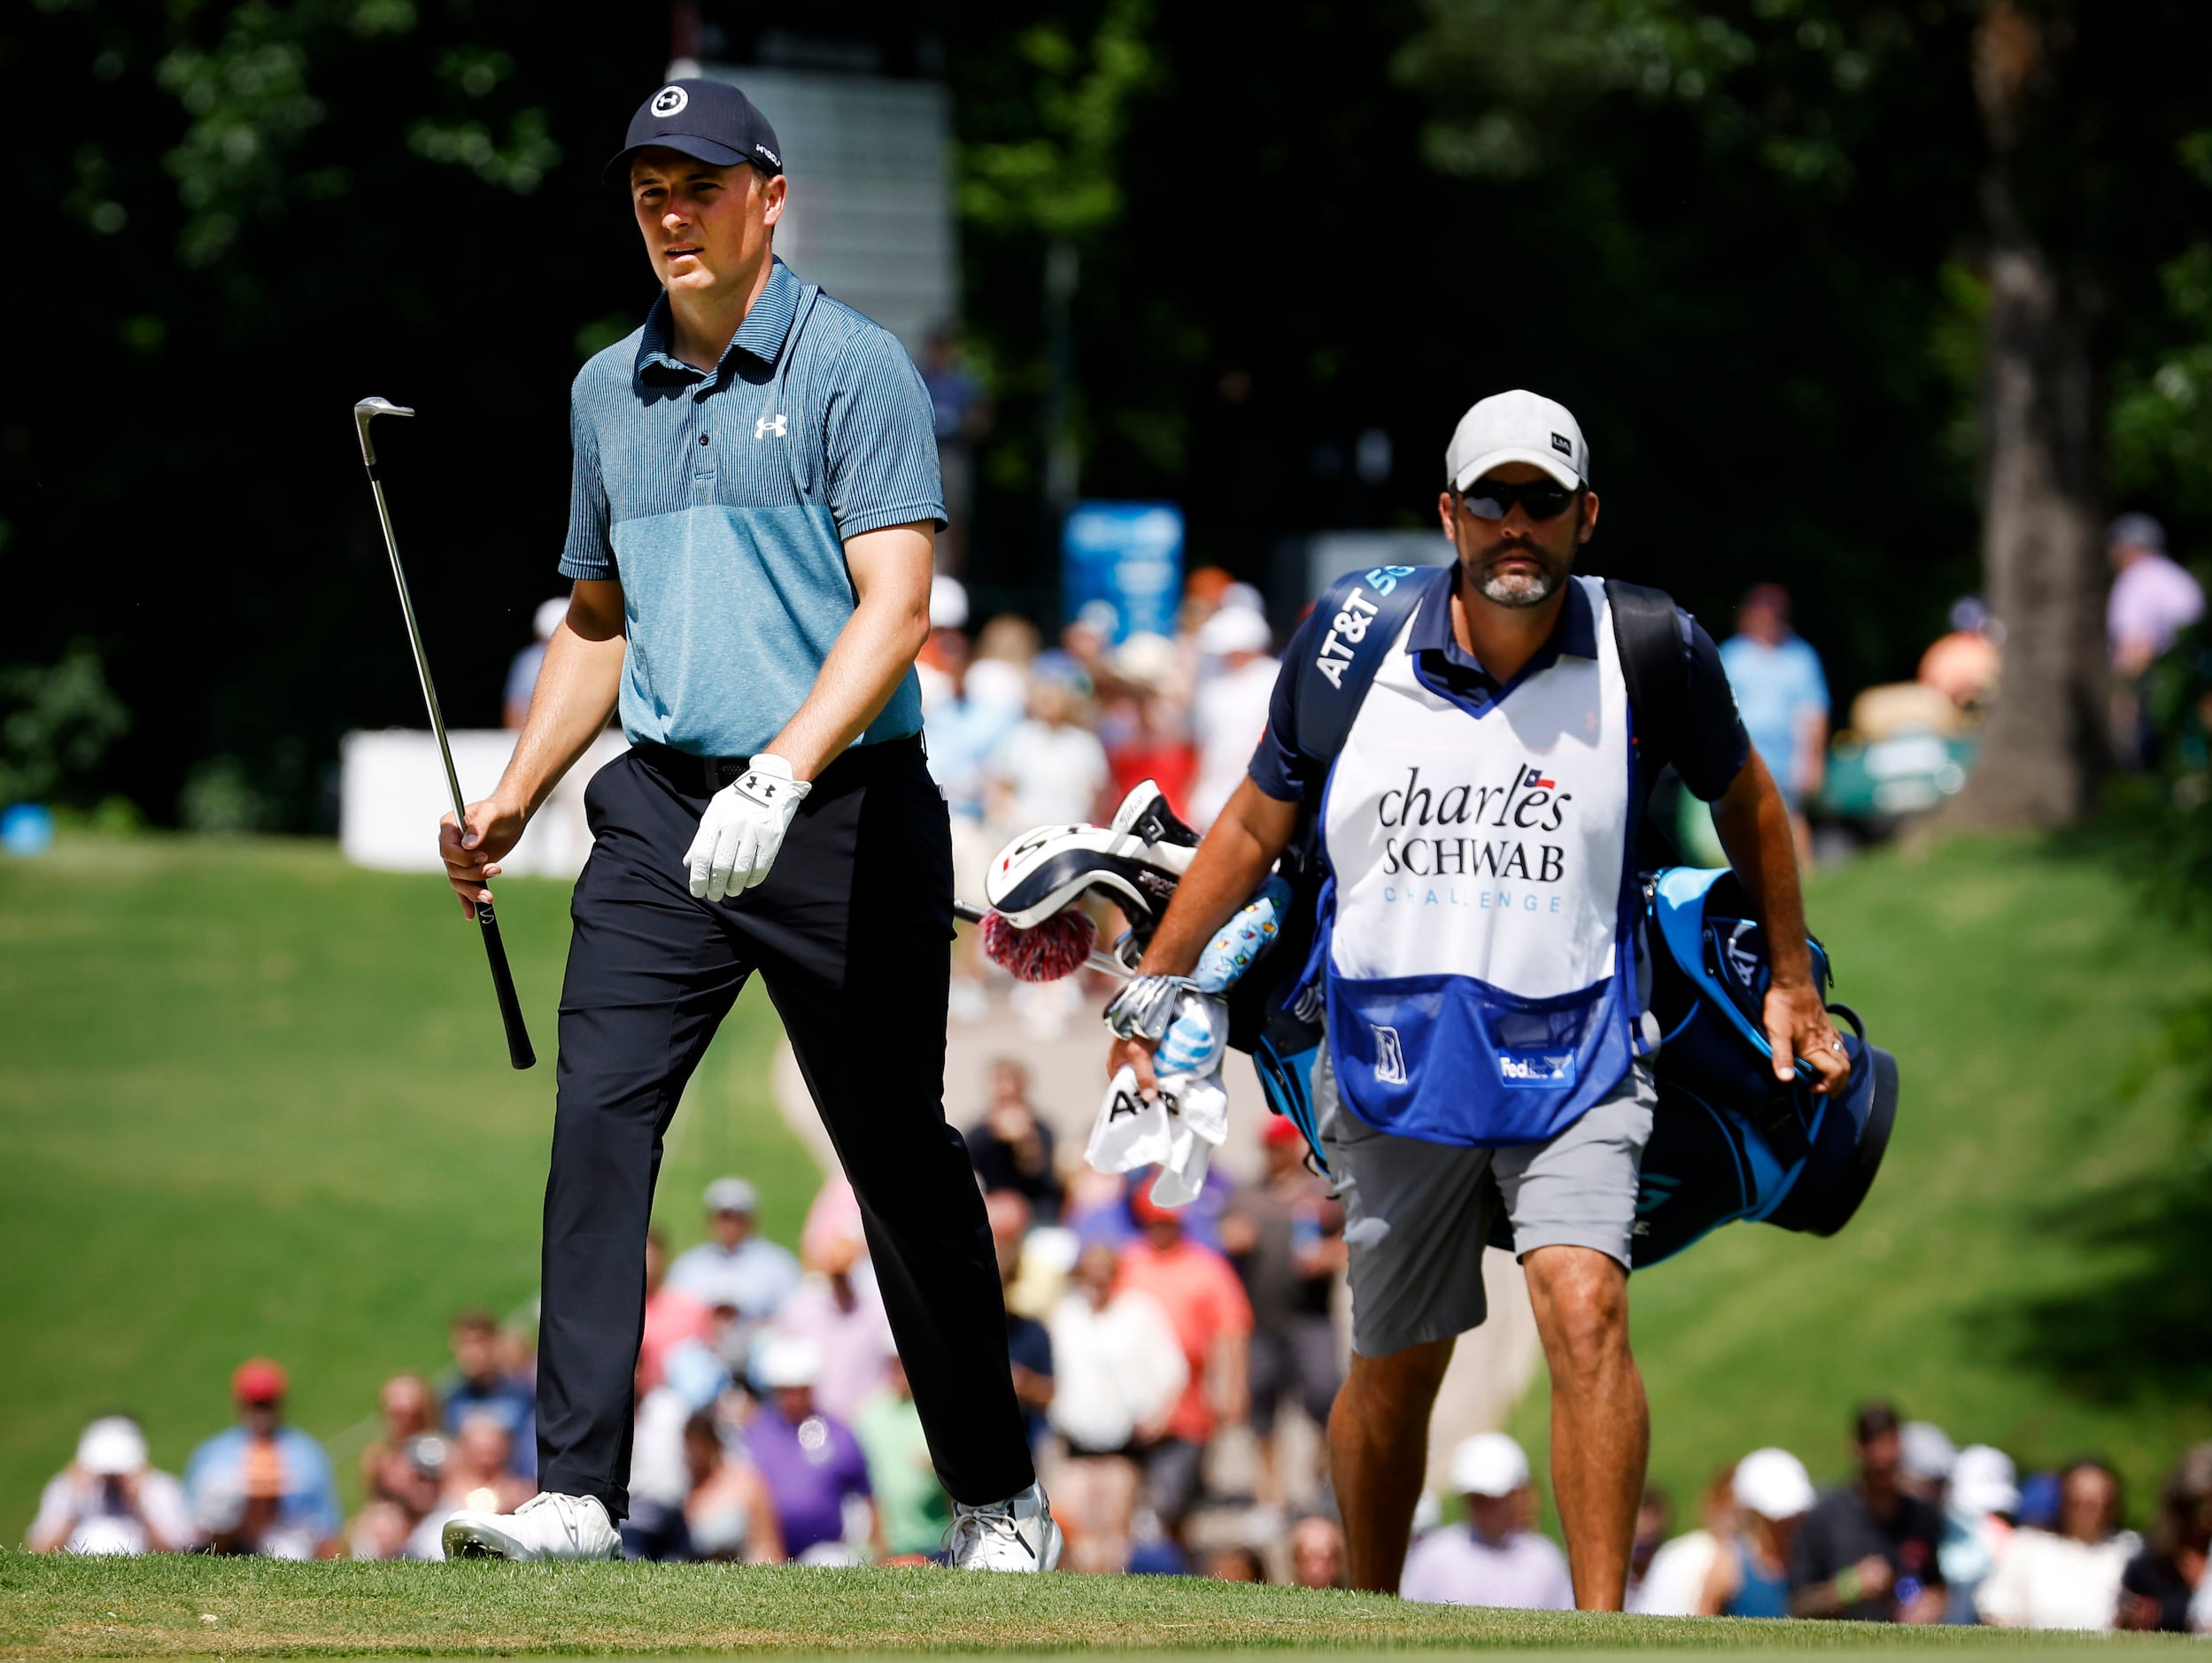 Professional golfer Jordan Spieth of Dallas walks up to the 8th green with his caddie...